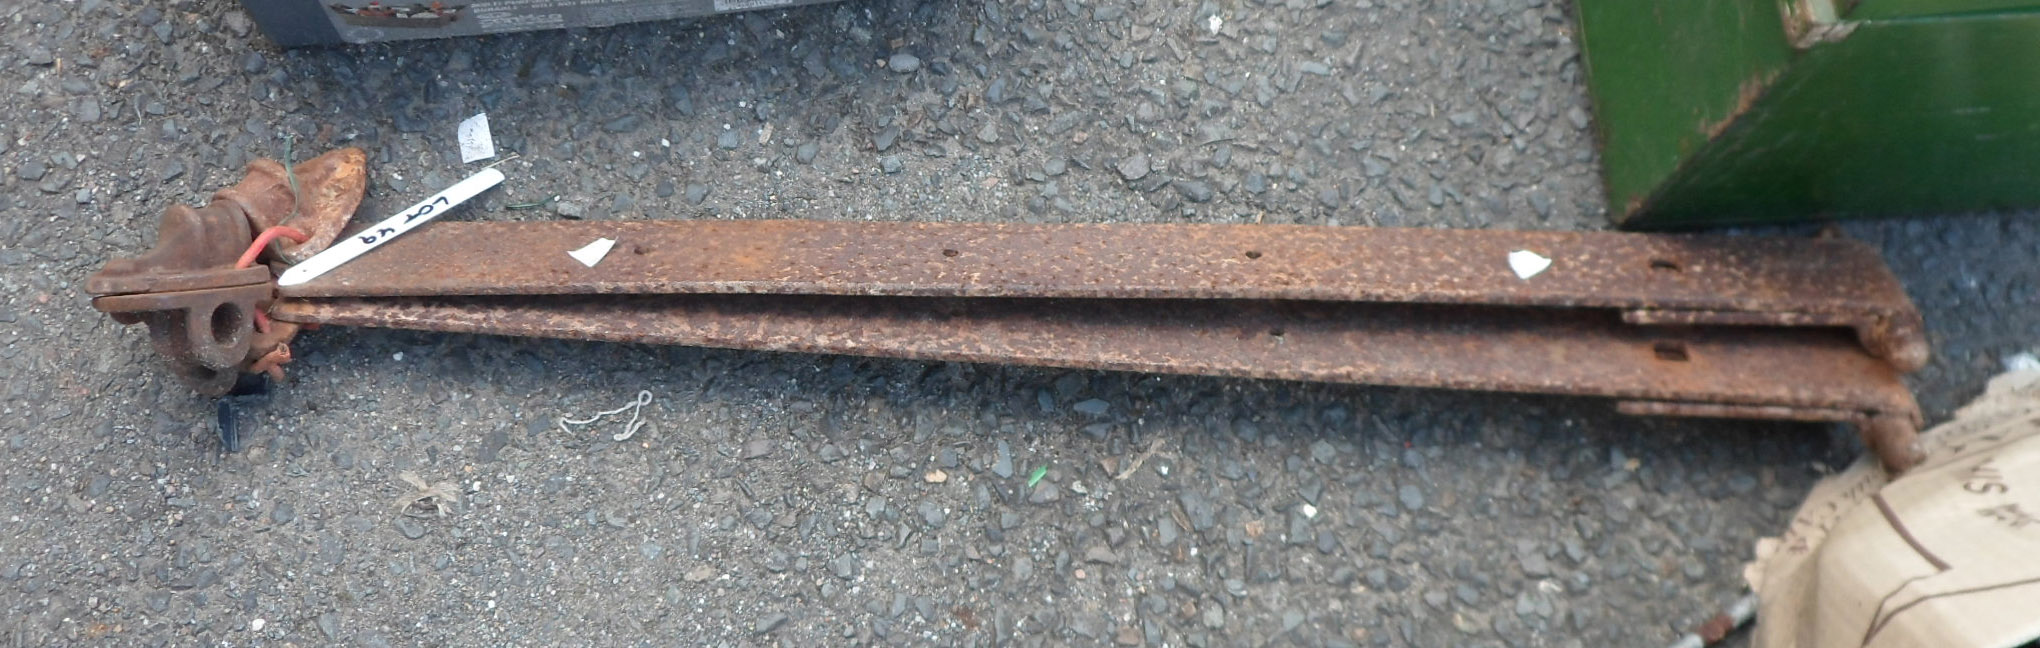 A pair of large strap hinges